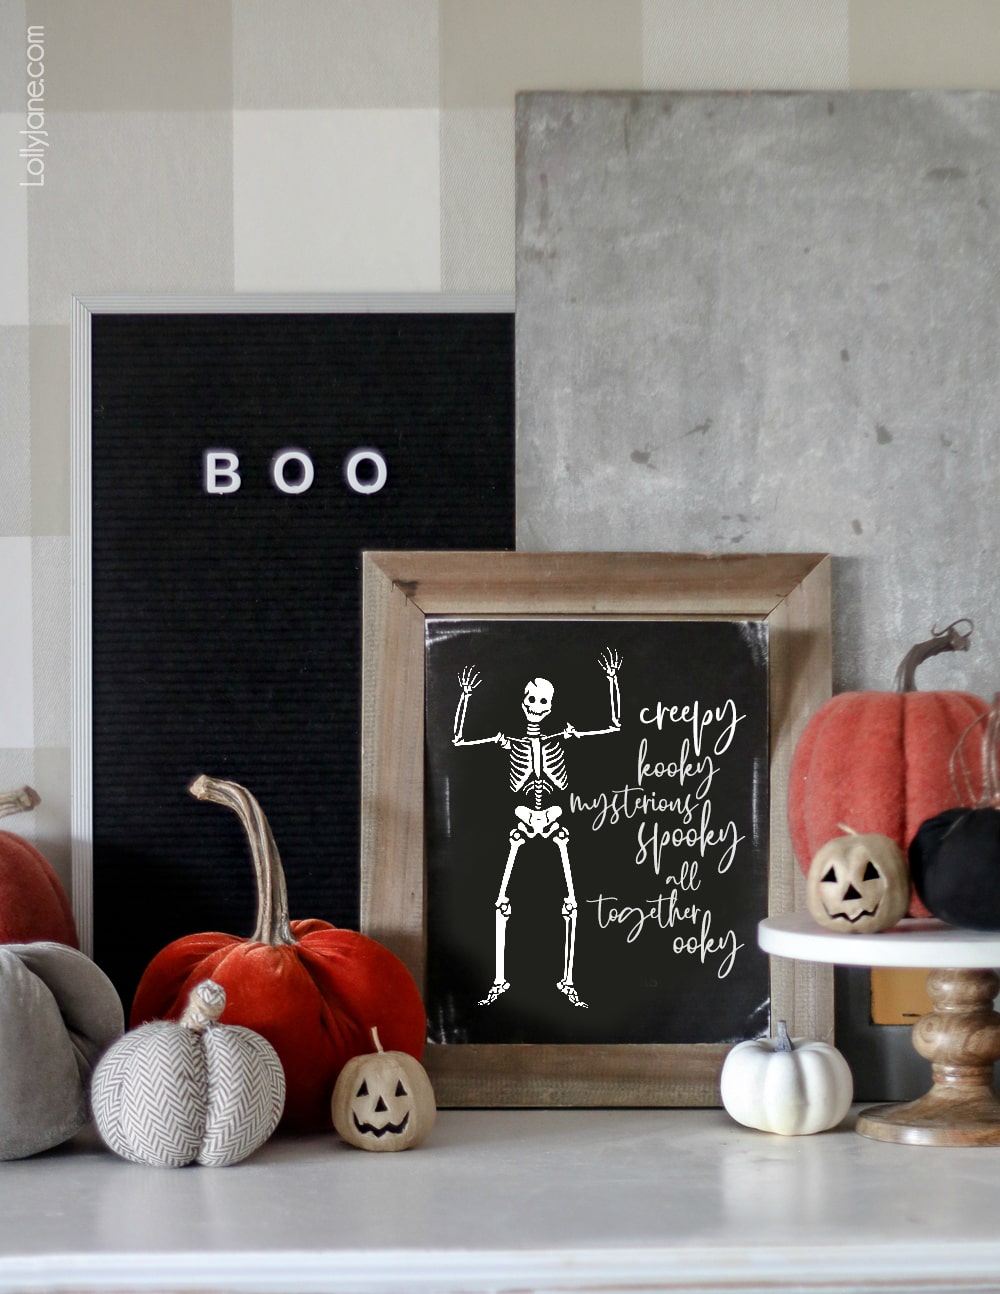 Cutest "Addams Family" inspired printable art... and FREE! Just print + display to add a pop of spook to your Halloween decor or party! #Halloween #printableart #halloweenprintable #halloweendecor